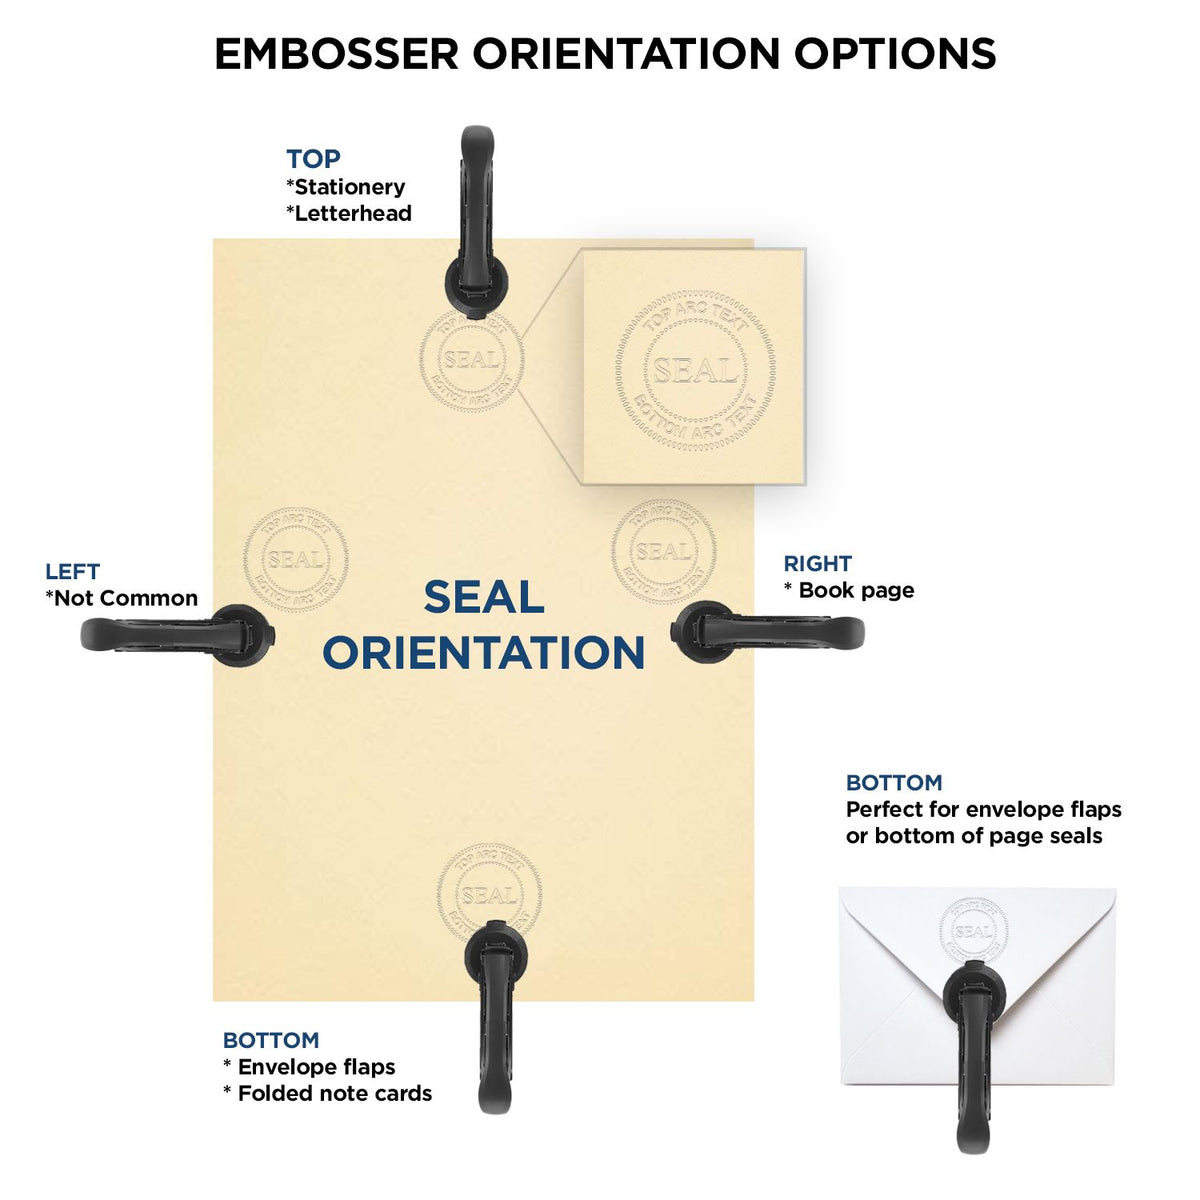 An infographic for the Missouri Engineer Desk Seal showing embosser orientation, this is showing examples of a top, bottom, right and left insert.